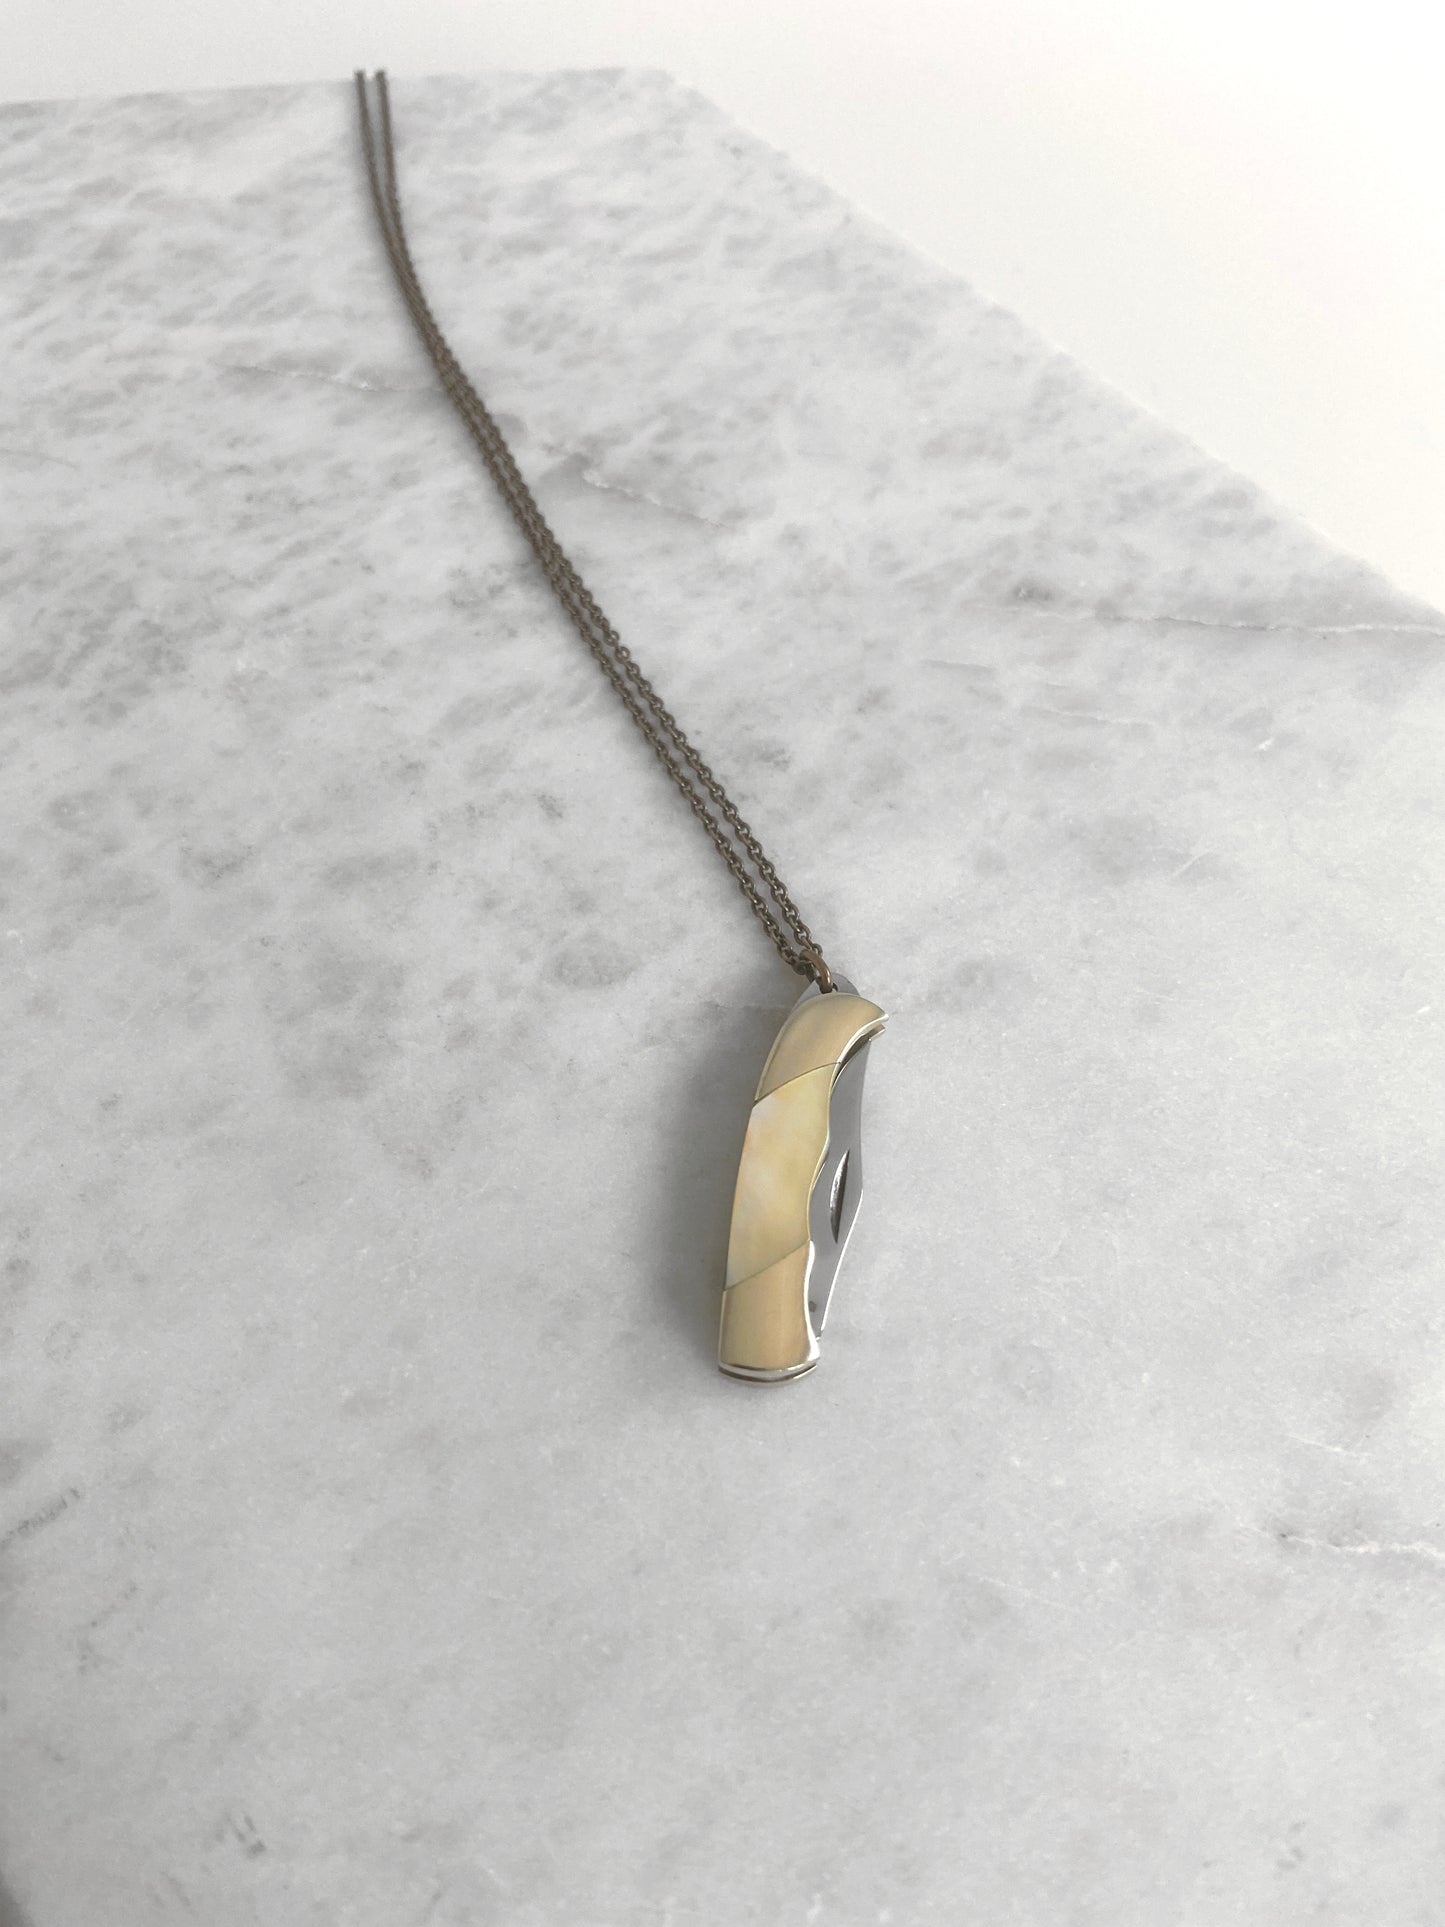 KNIFE NECKLACE: MOTHER OF PEARL / AGED BRASS